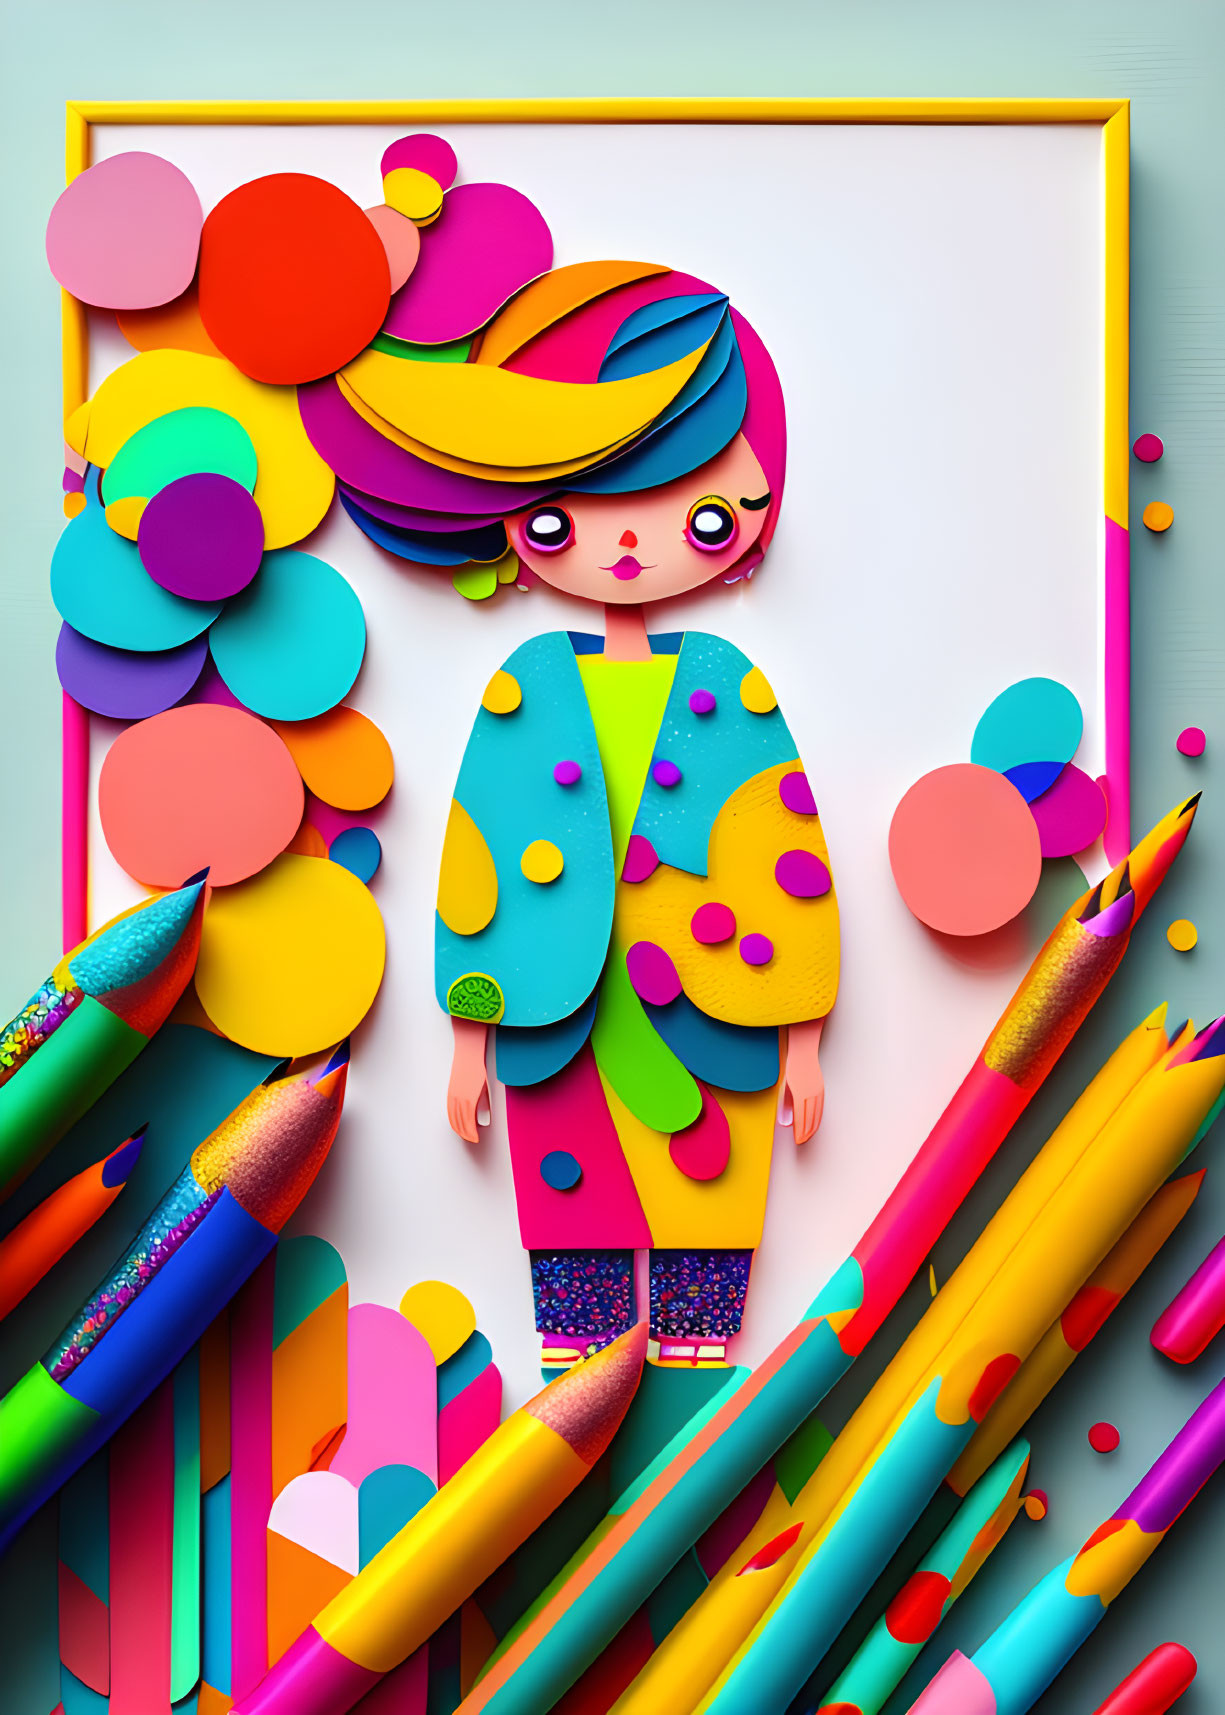 Colorful 3D illustration of stylized girl with oversized pencils in vibrant setting